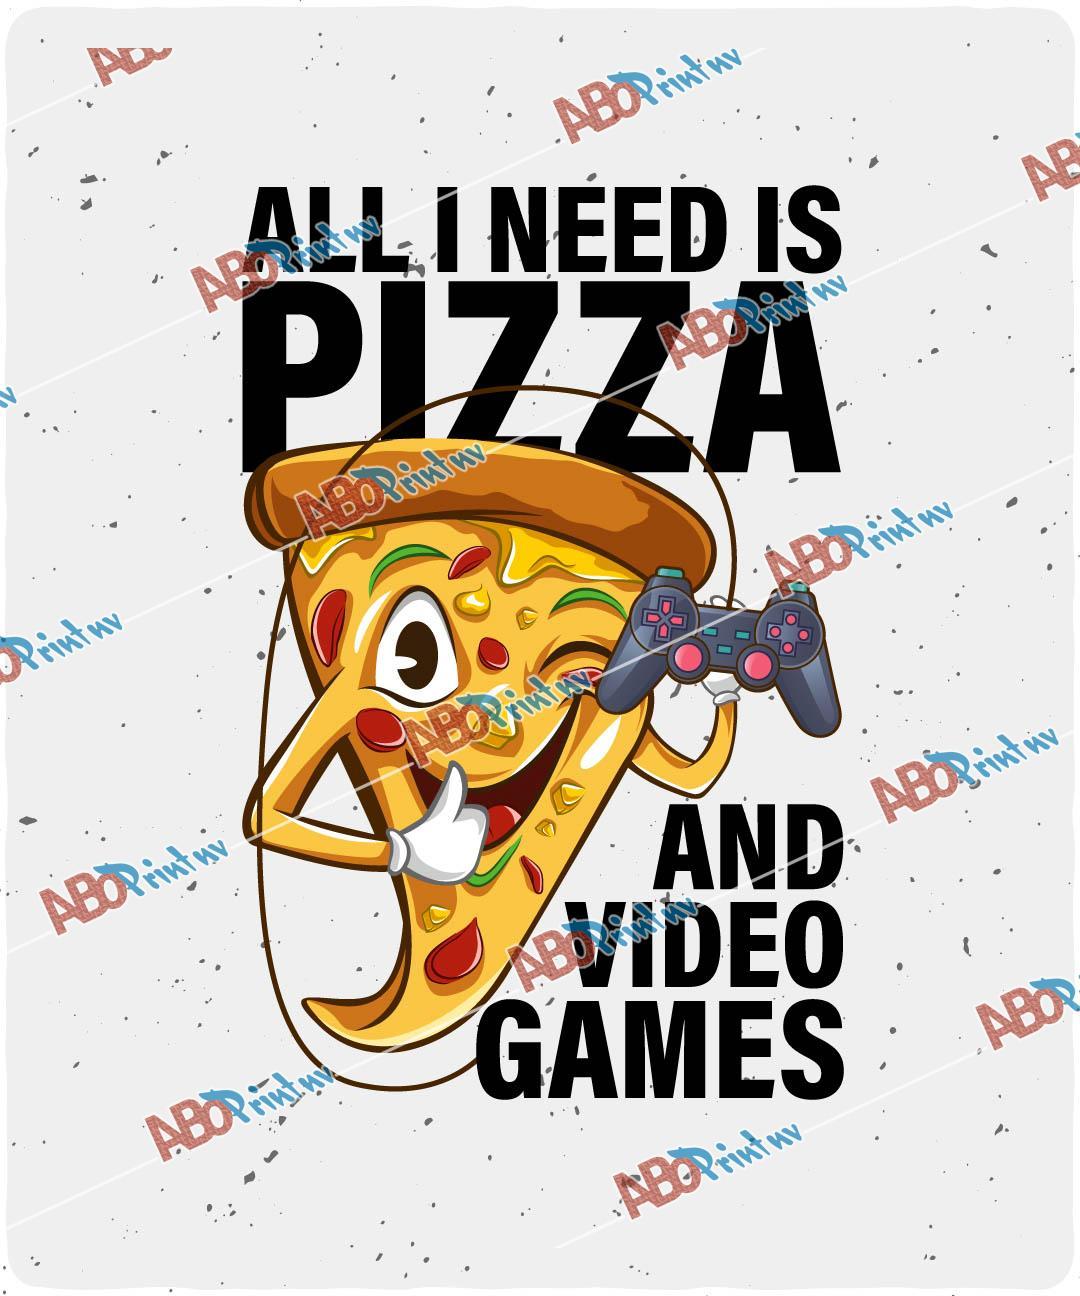 All I Need Is Pizza And Video Games.jpg